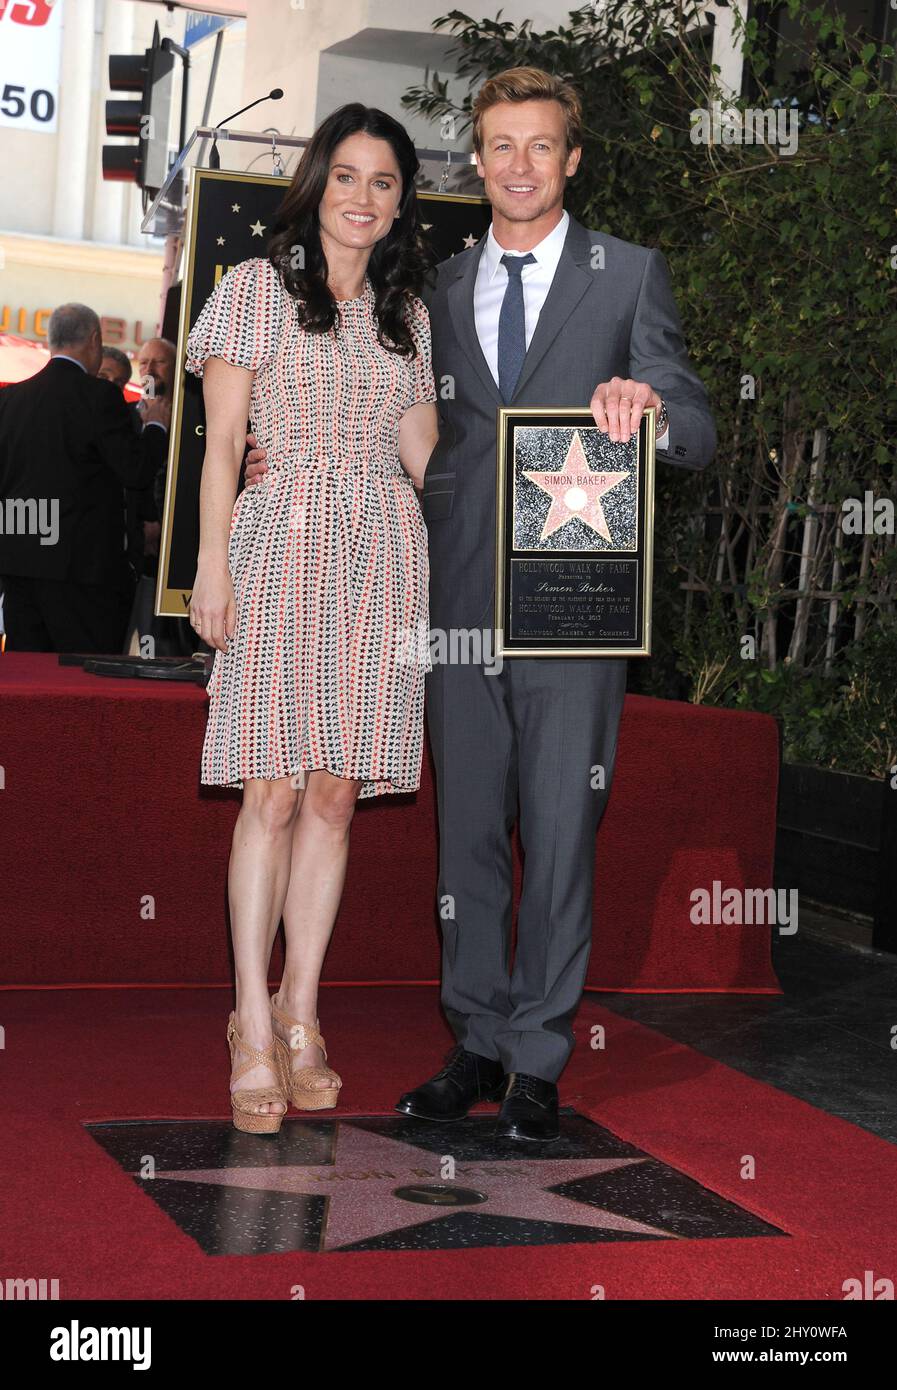 Robin Tunney and Simon Baker Simon Baker Honored with Star on the Hollywood Walk of Fame Stock Photo